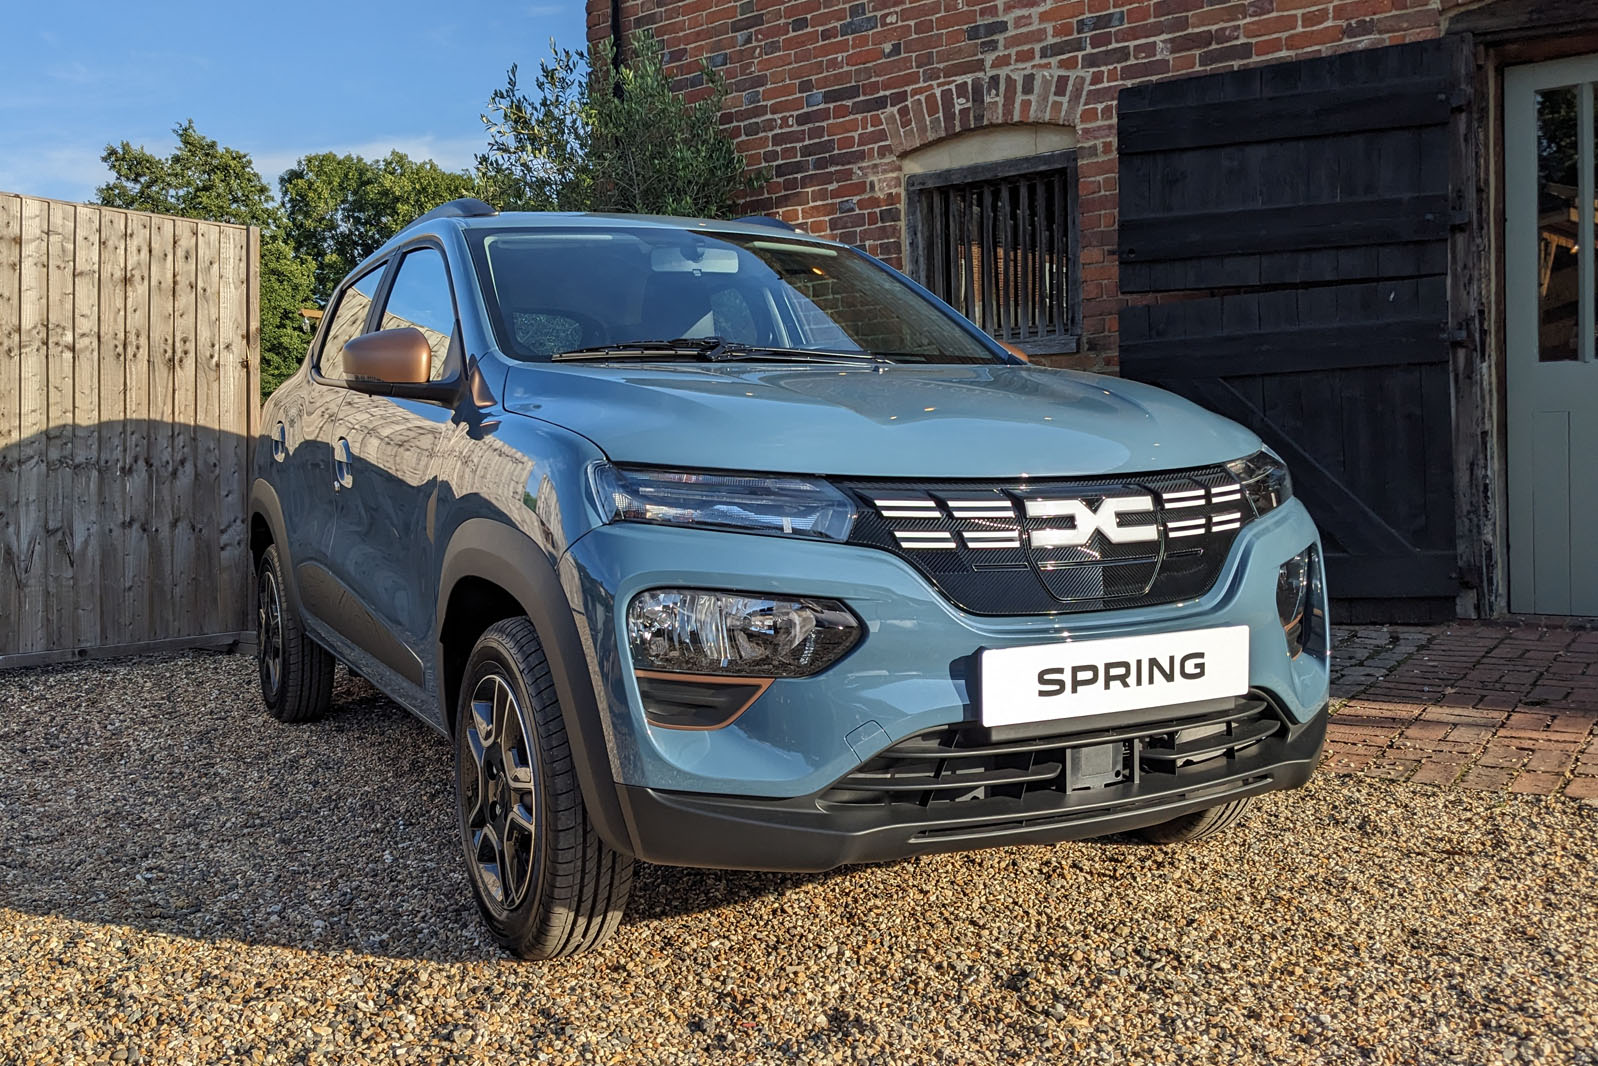 Dacia Spring electric: the low-cost electric car?